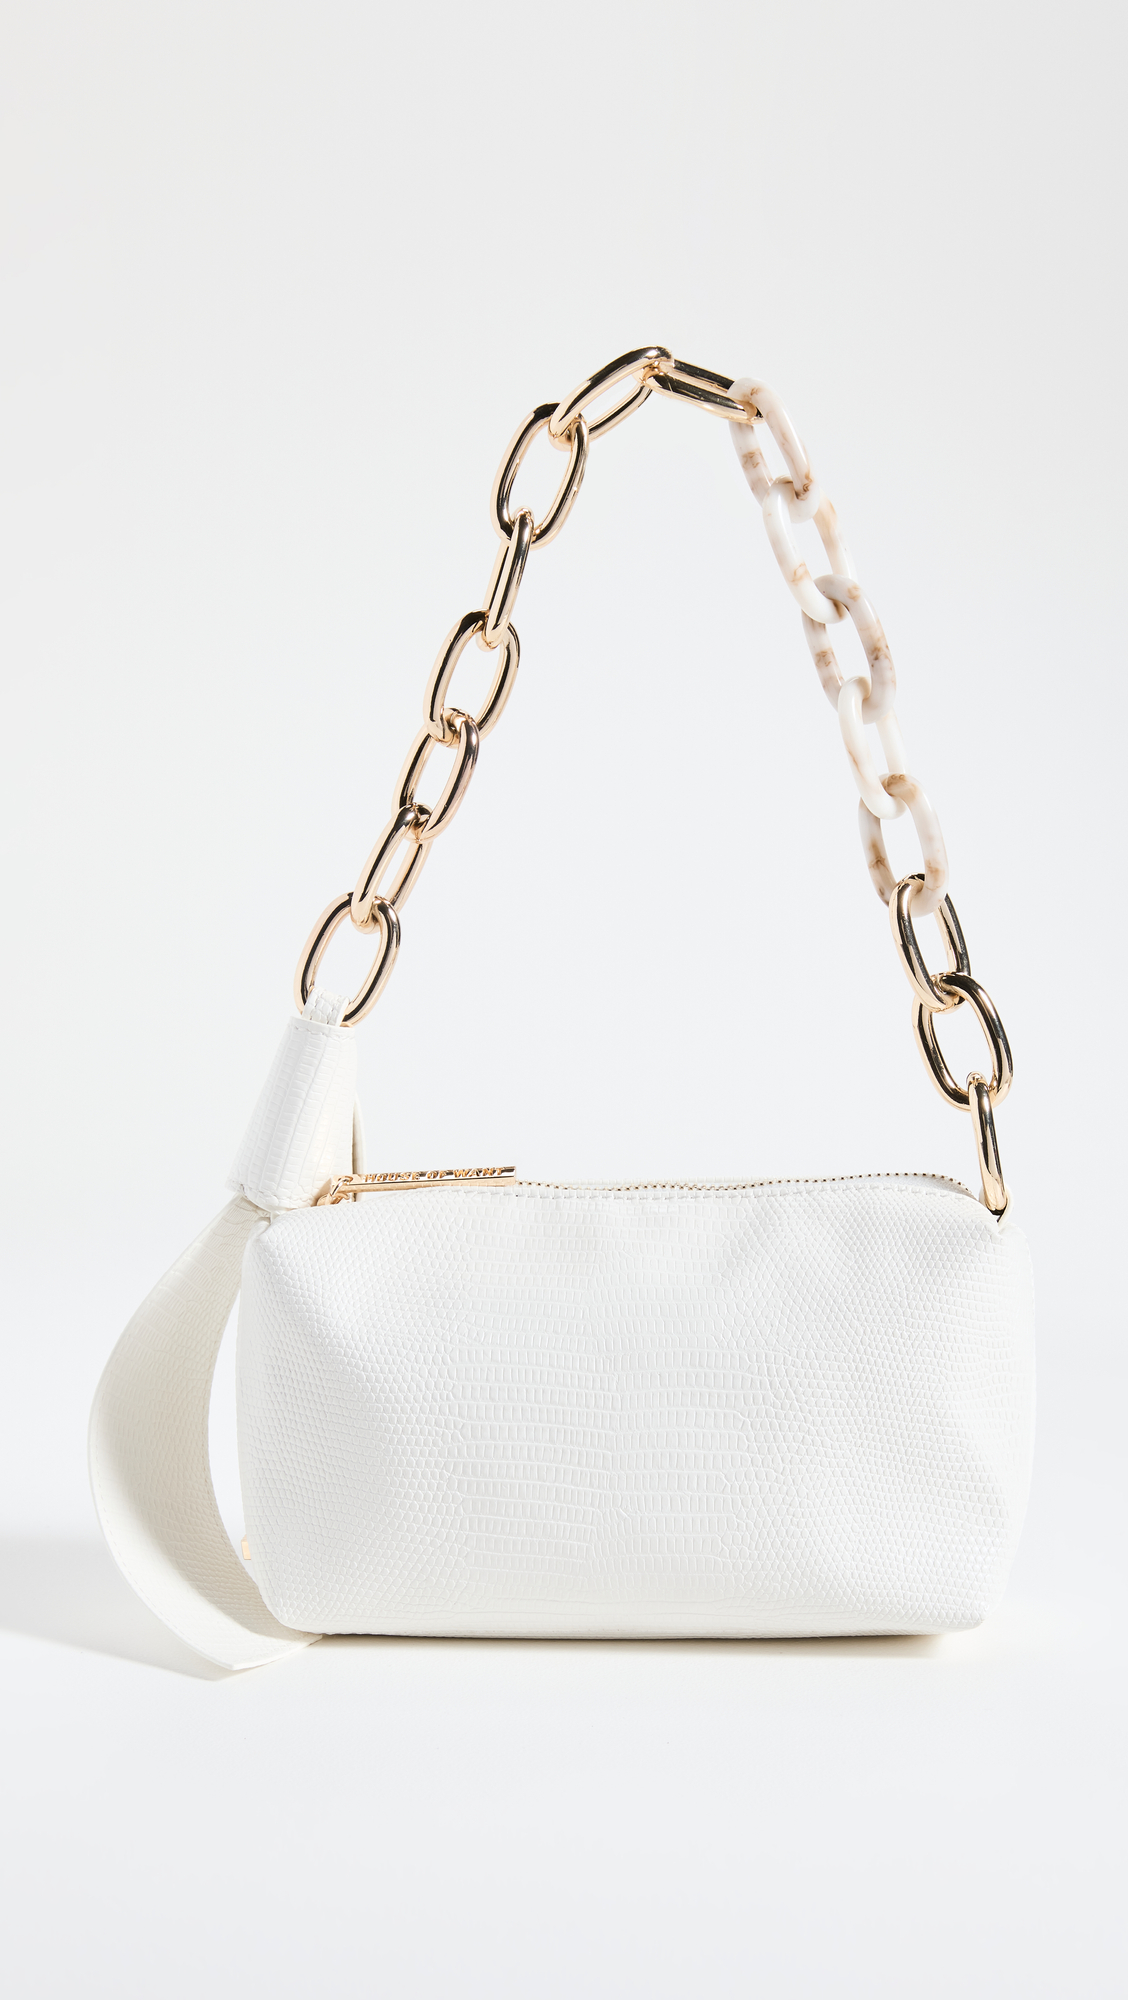 House of Want H.O.W. We Are Fabulous Shoulder Bag